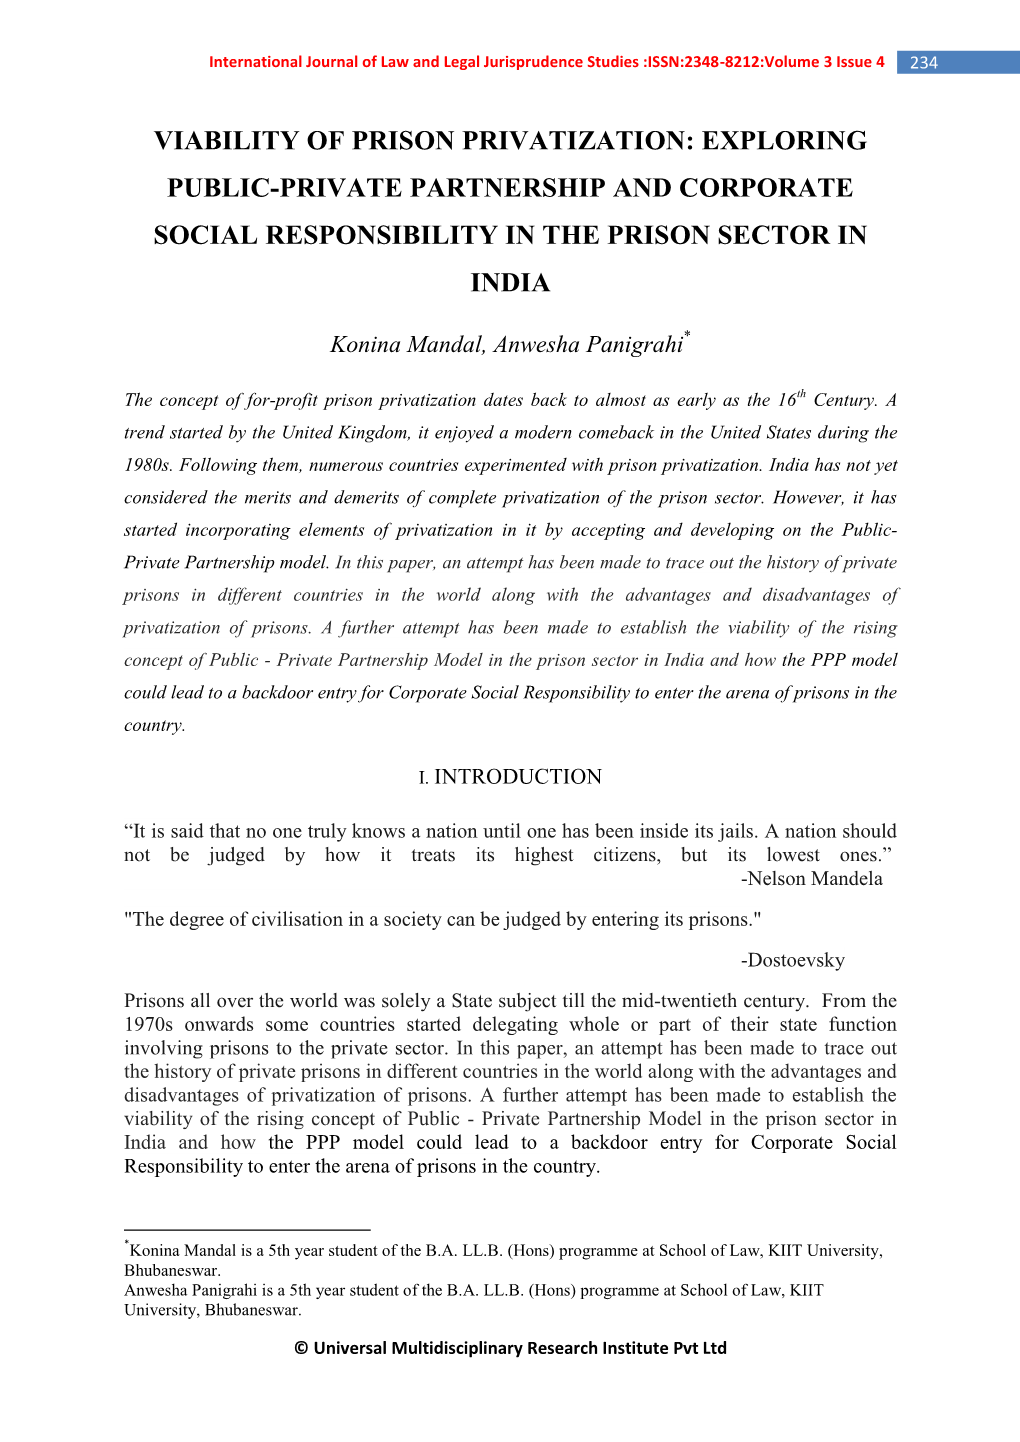 Viability of Prison Privatization: Exploring Public-Private Partnership and Corporate Social Responsibility in the Prison Sector in India